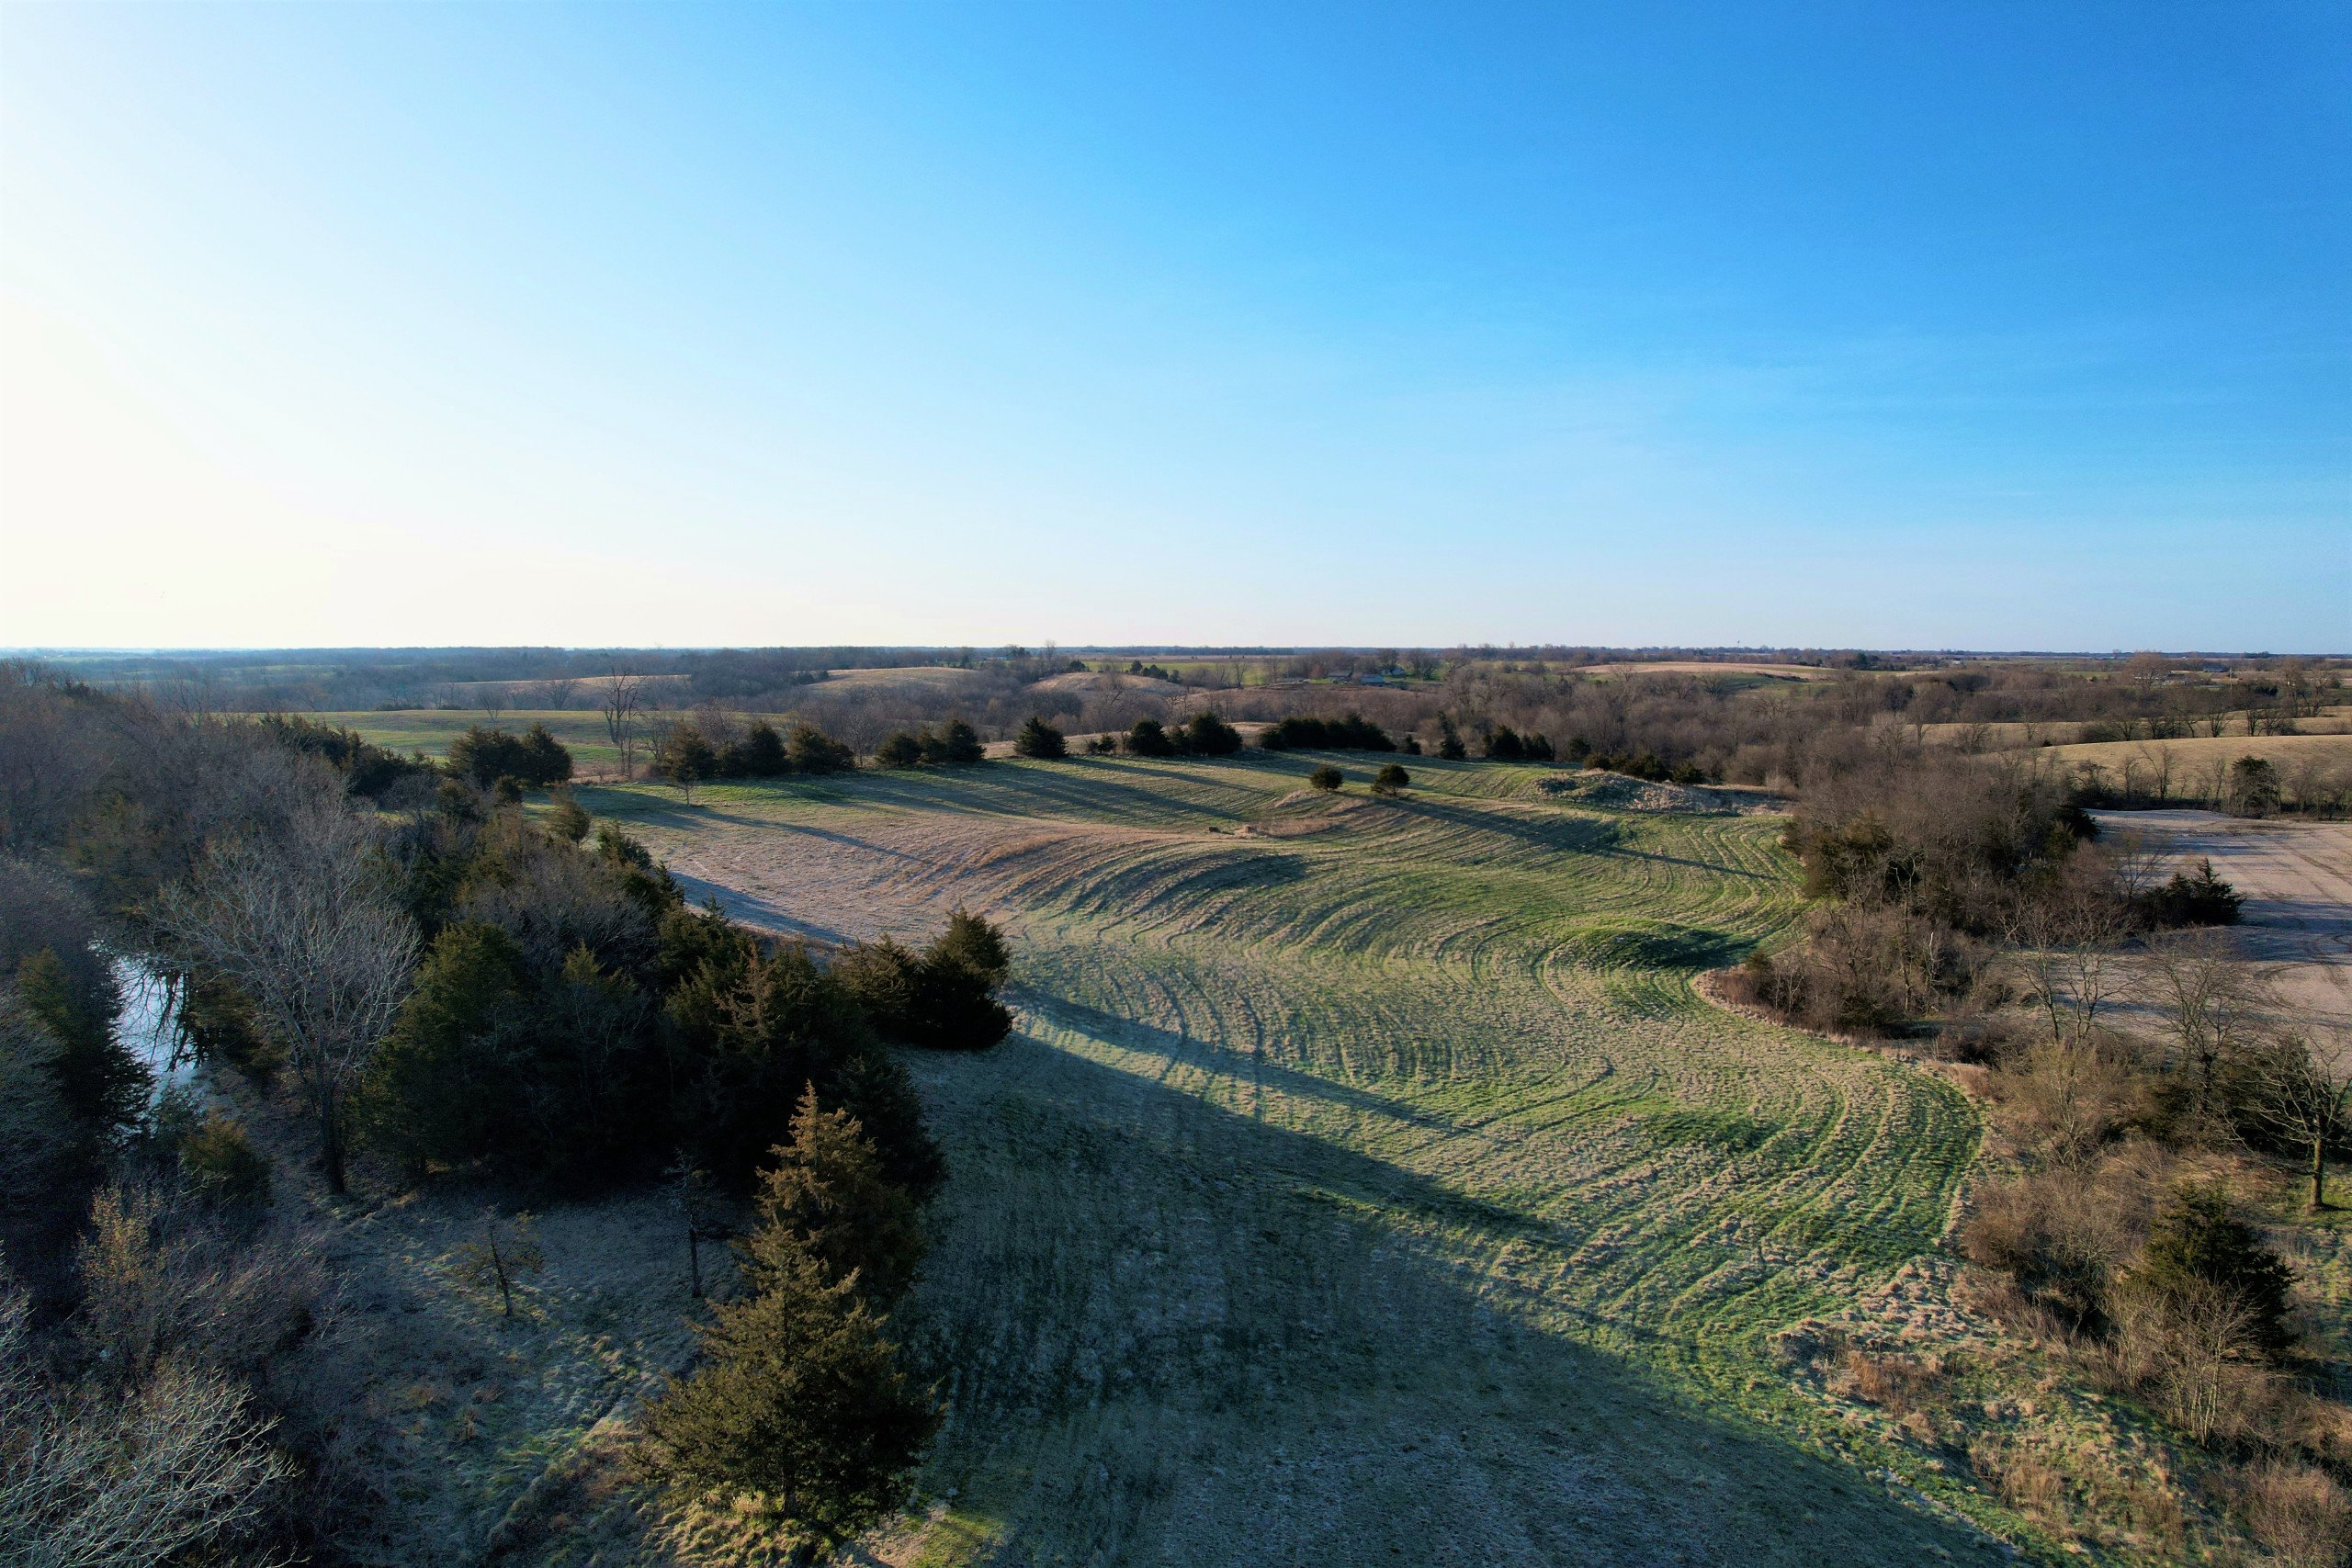 appanoose-county-iowa-97-acres-listing-number-16357-Copy of Copy of DJI_0274-6.jpg